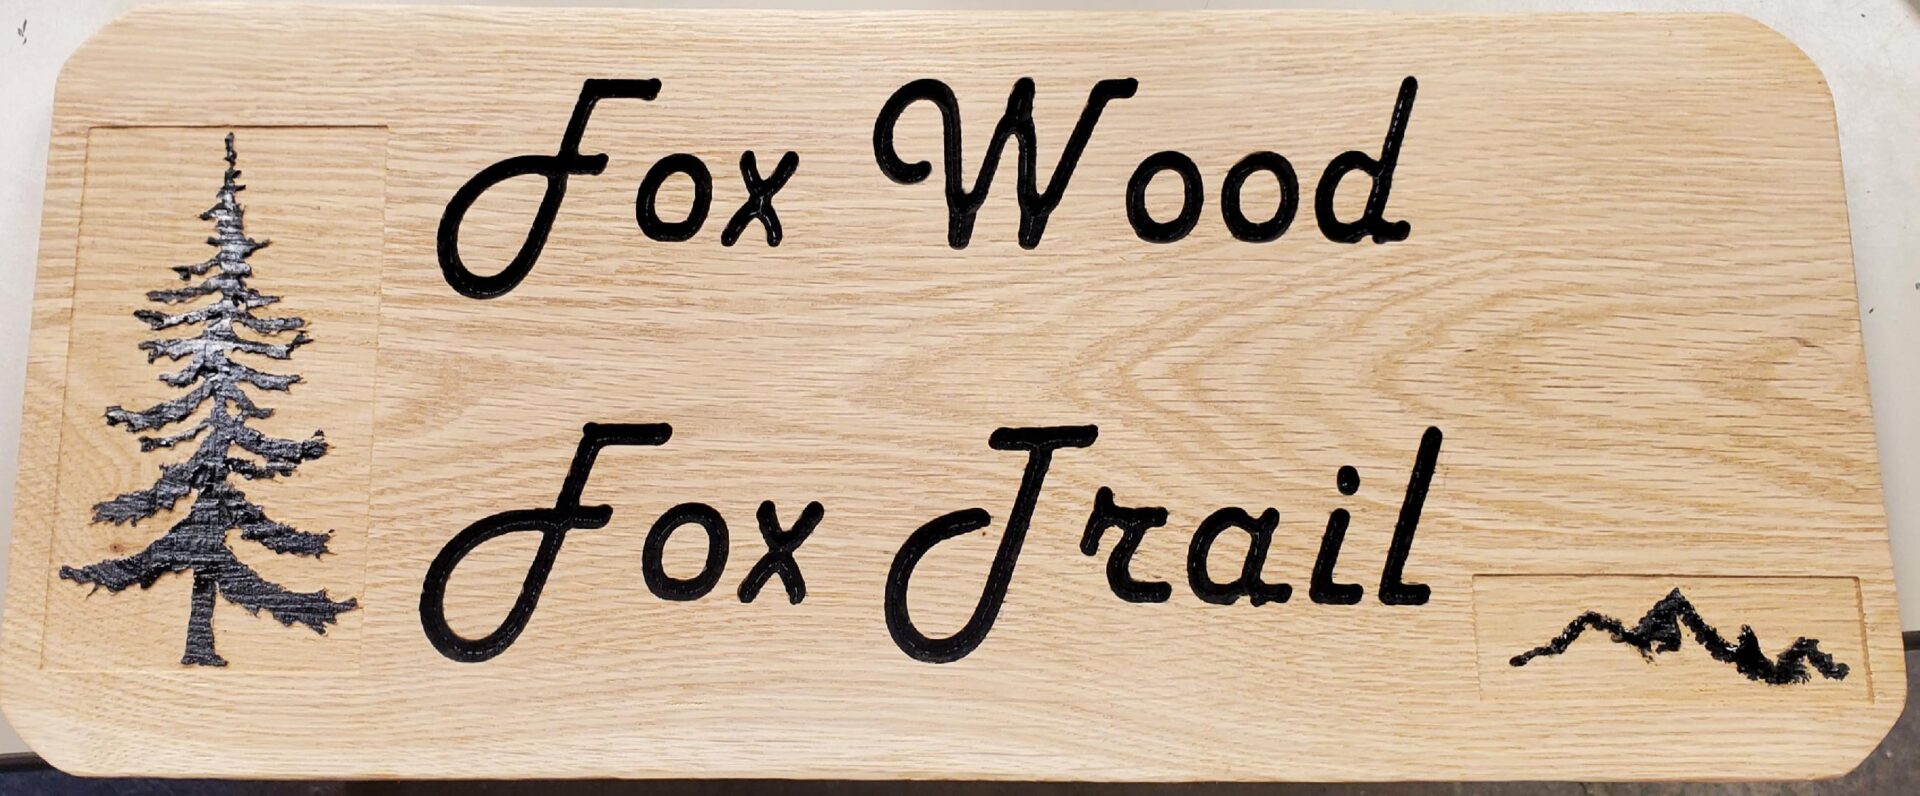 Wooden carving of fox wood fox jrail with a tree in it.